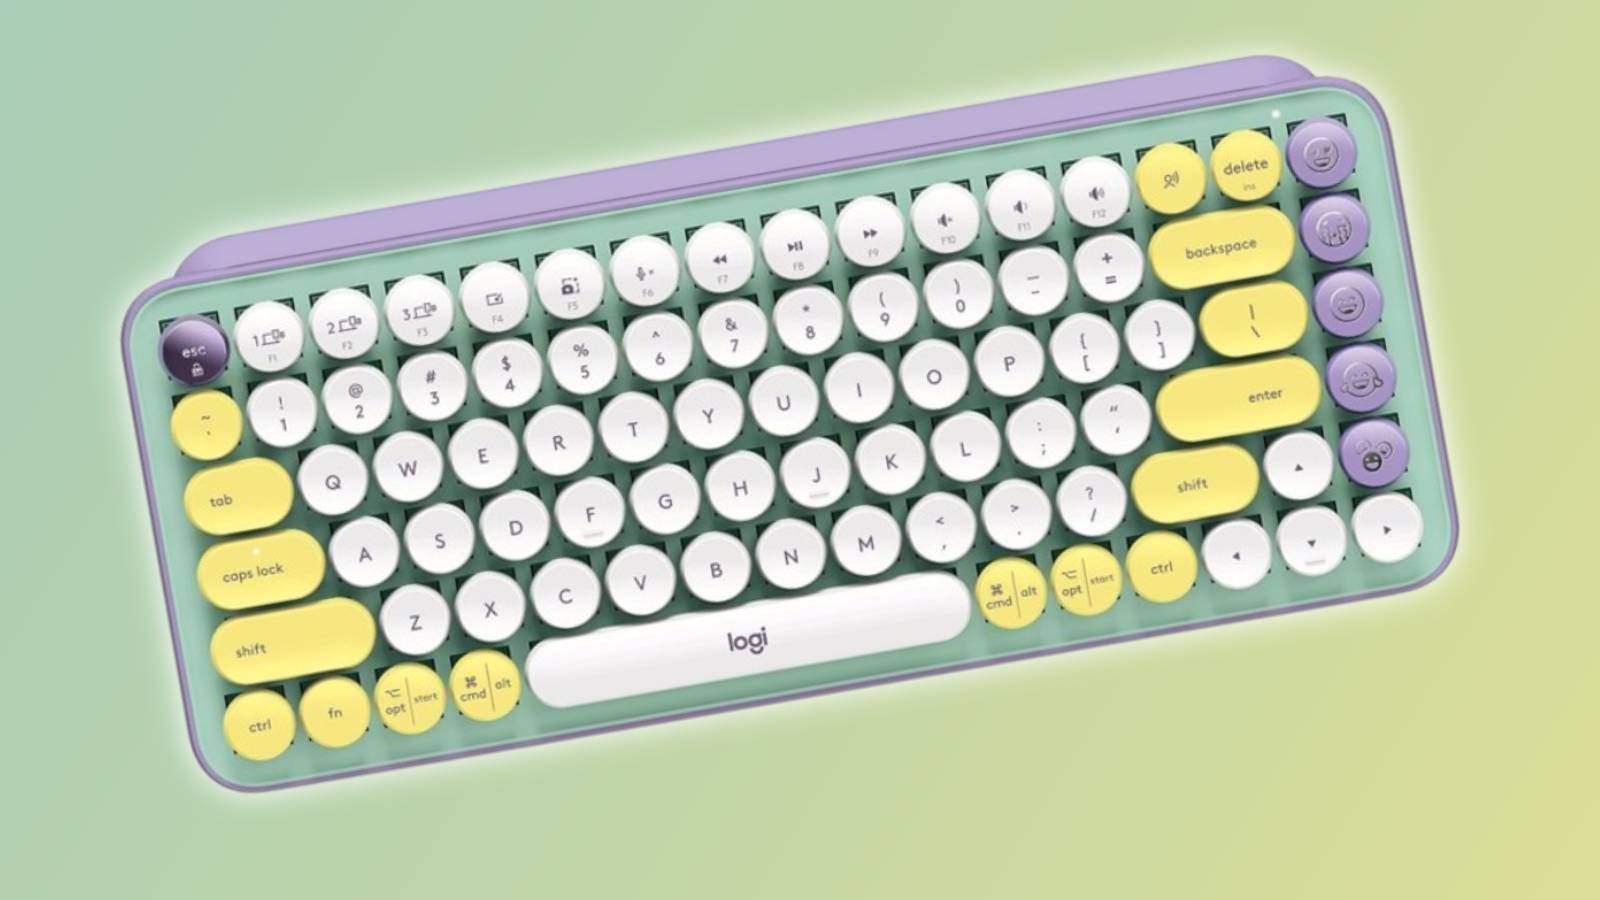 Image of the Daydream Mint Logitech POP Keys keyboard on a green and yellow background.